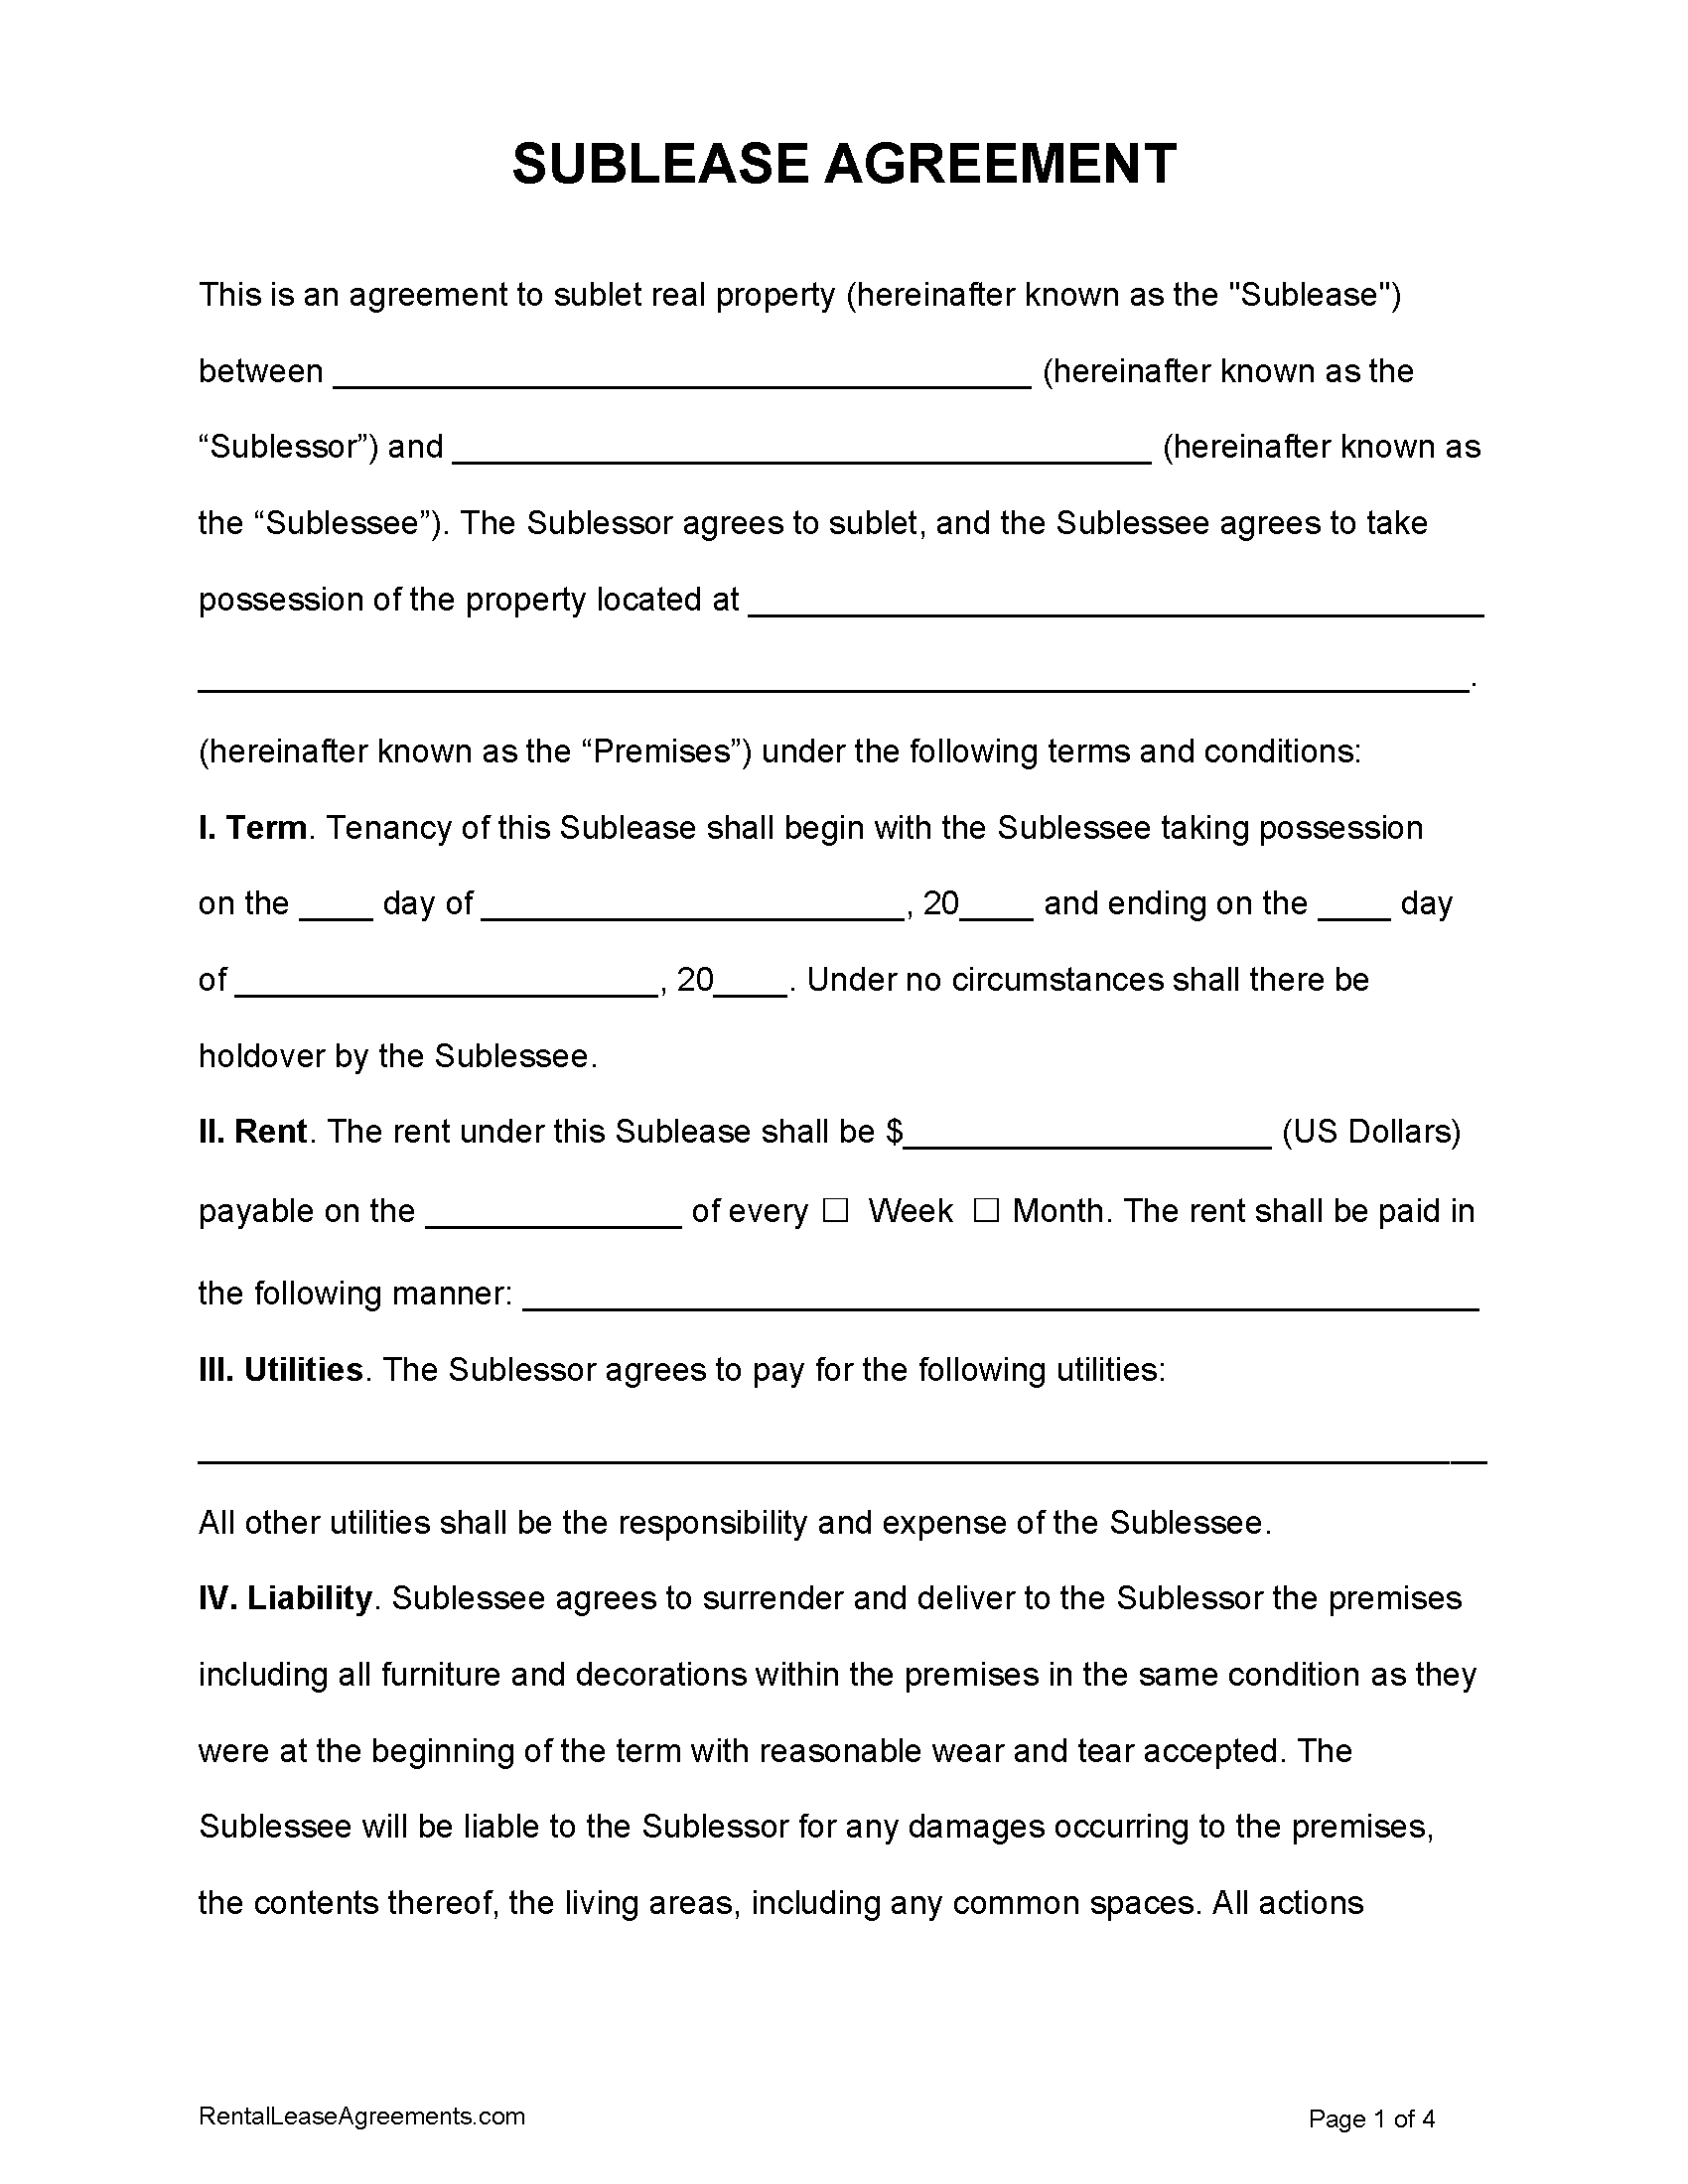 Free Sublease Agreement Template  PDF - Word Regarding free commercial sublease agreement template